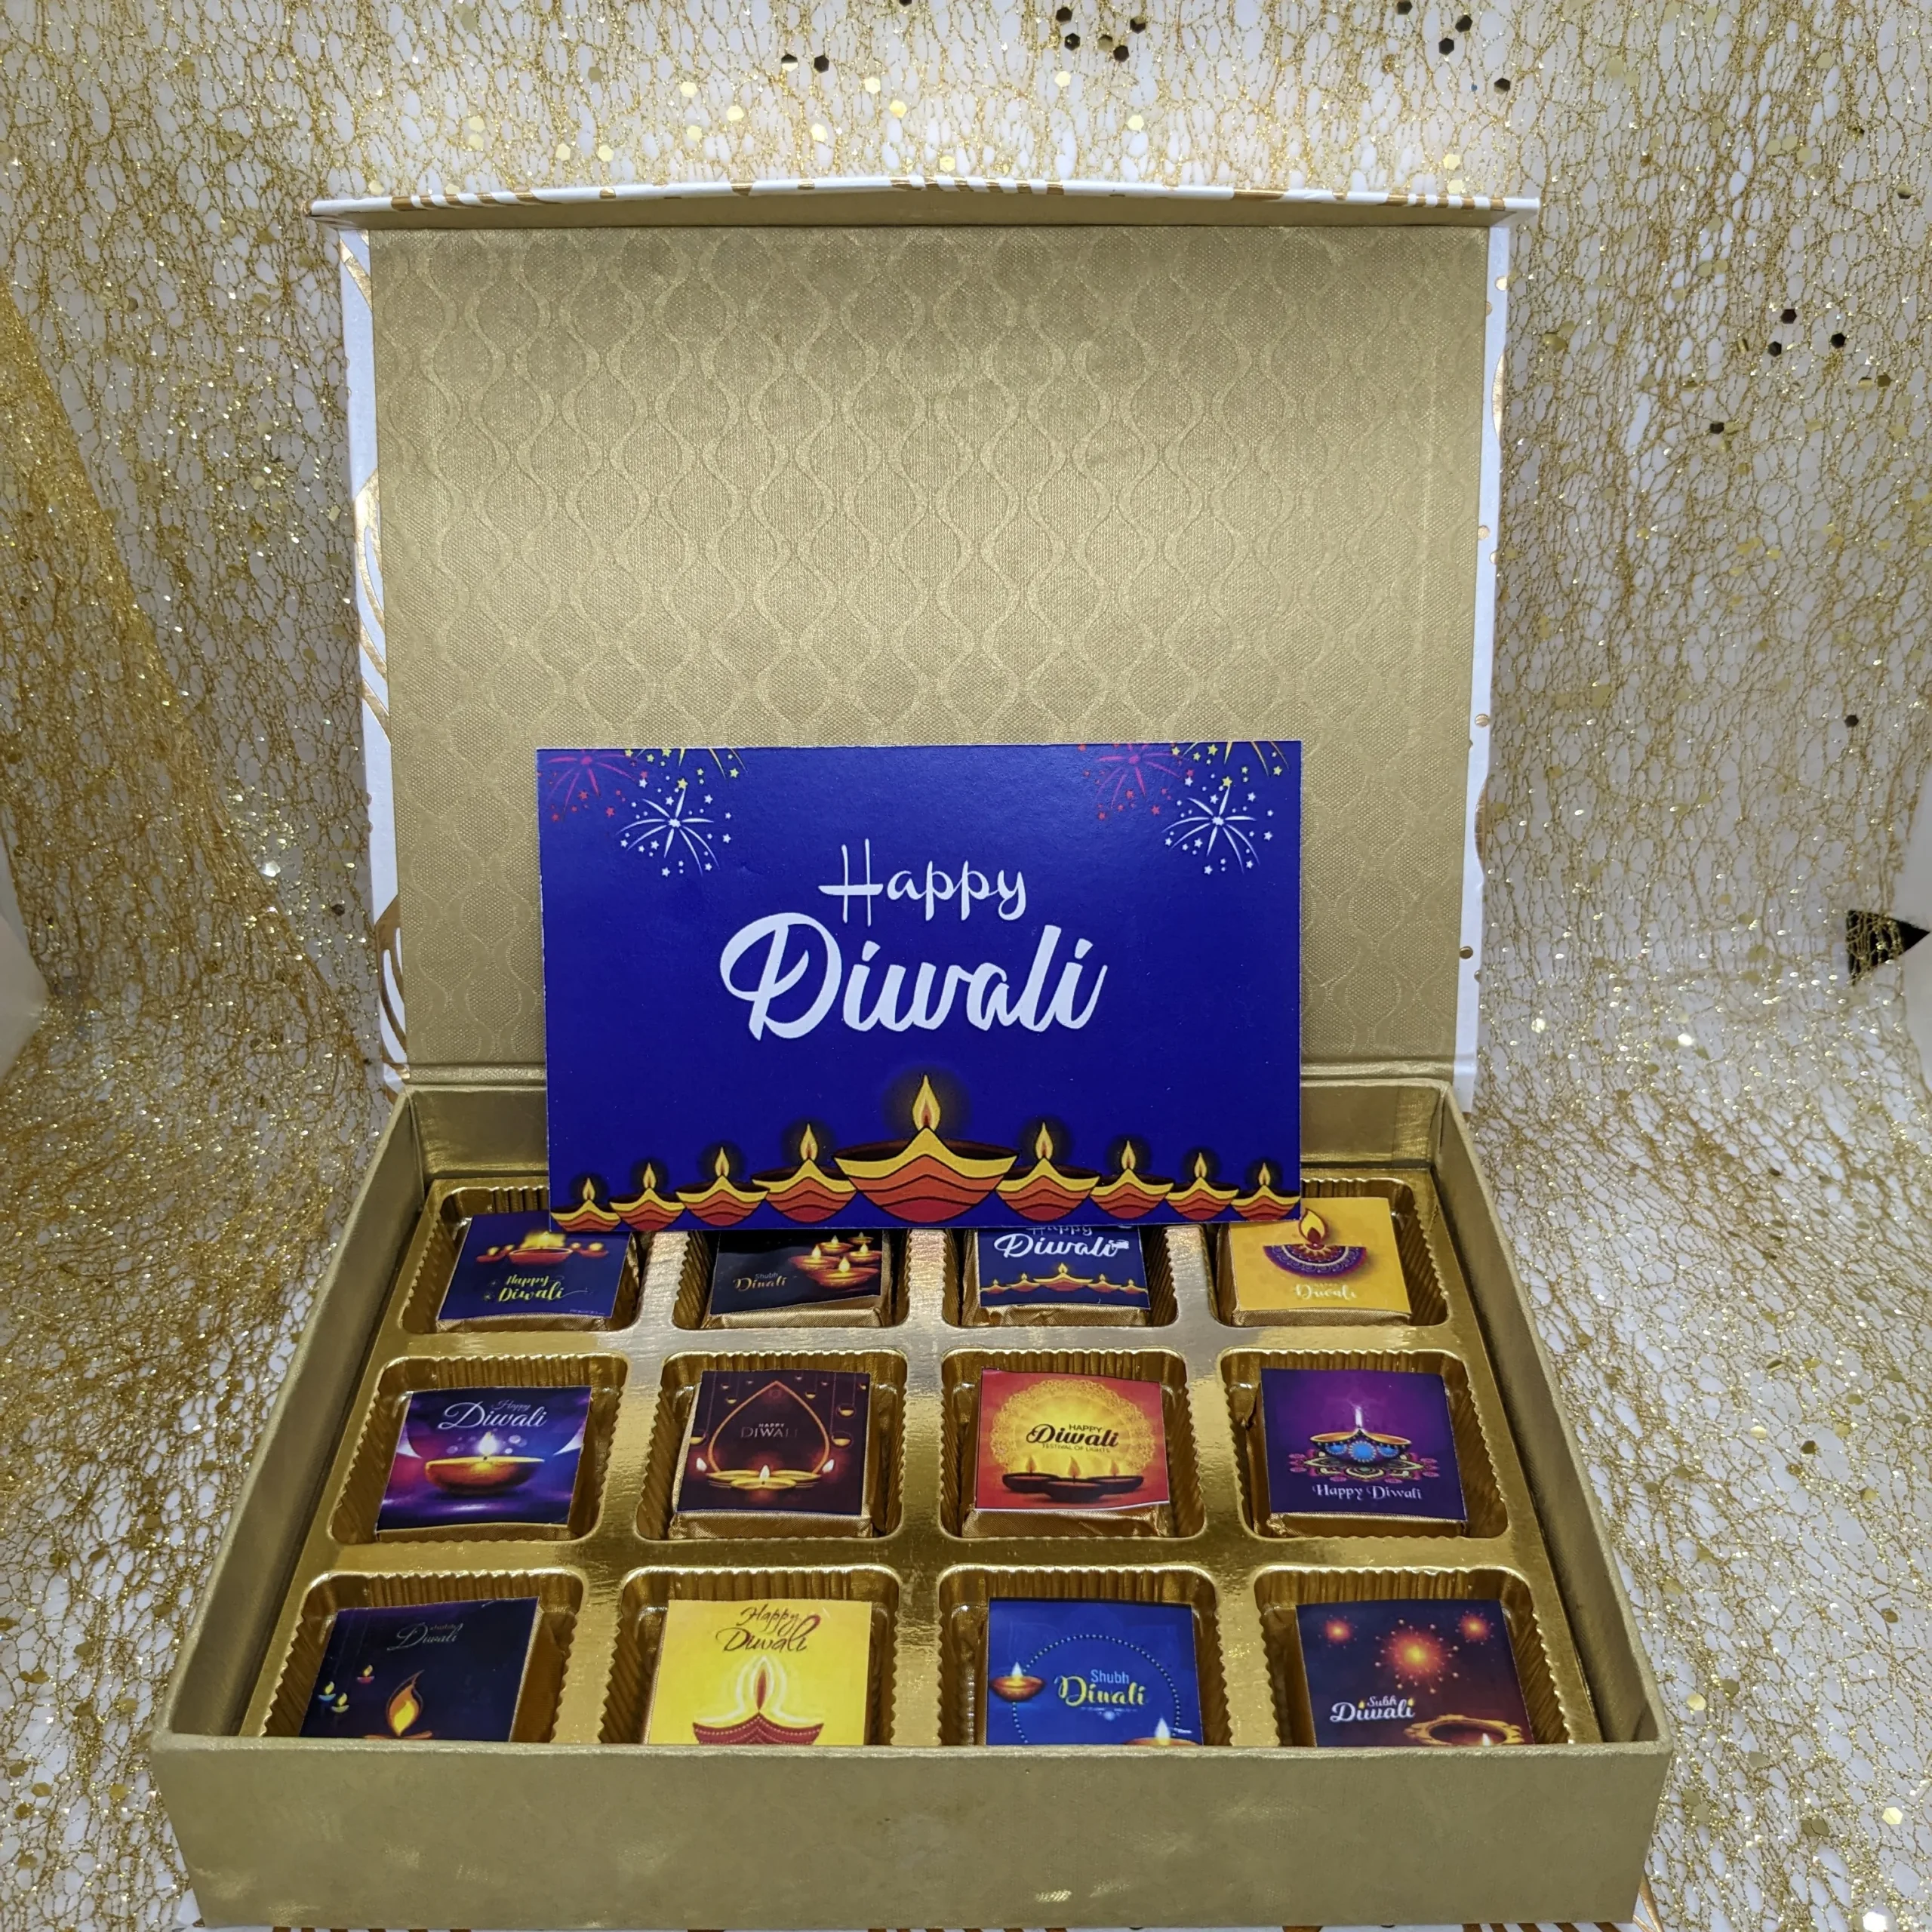 Buy Customized Chocolate Wrapper with Greeting Message Chocolate, Nuts, and  Sweet Combo Gift Set - For Employees, Dealers, Customers, Stakeholders,  Personal or Corporate Diwali Gifting CV7 online - The Gifting Marketplace